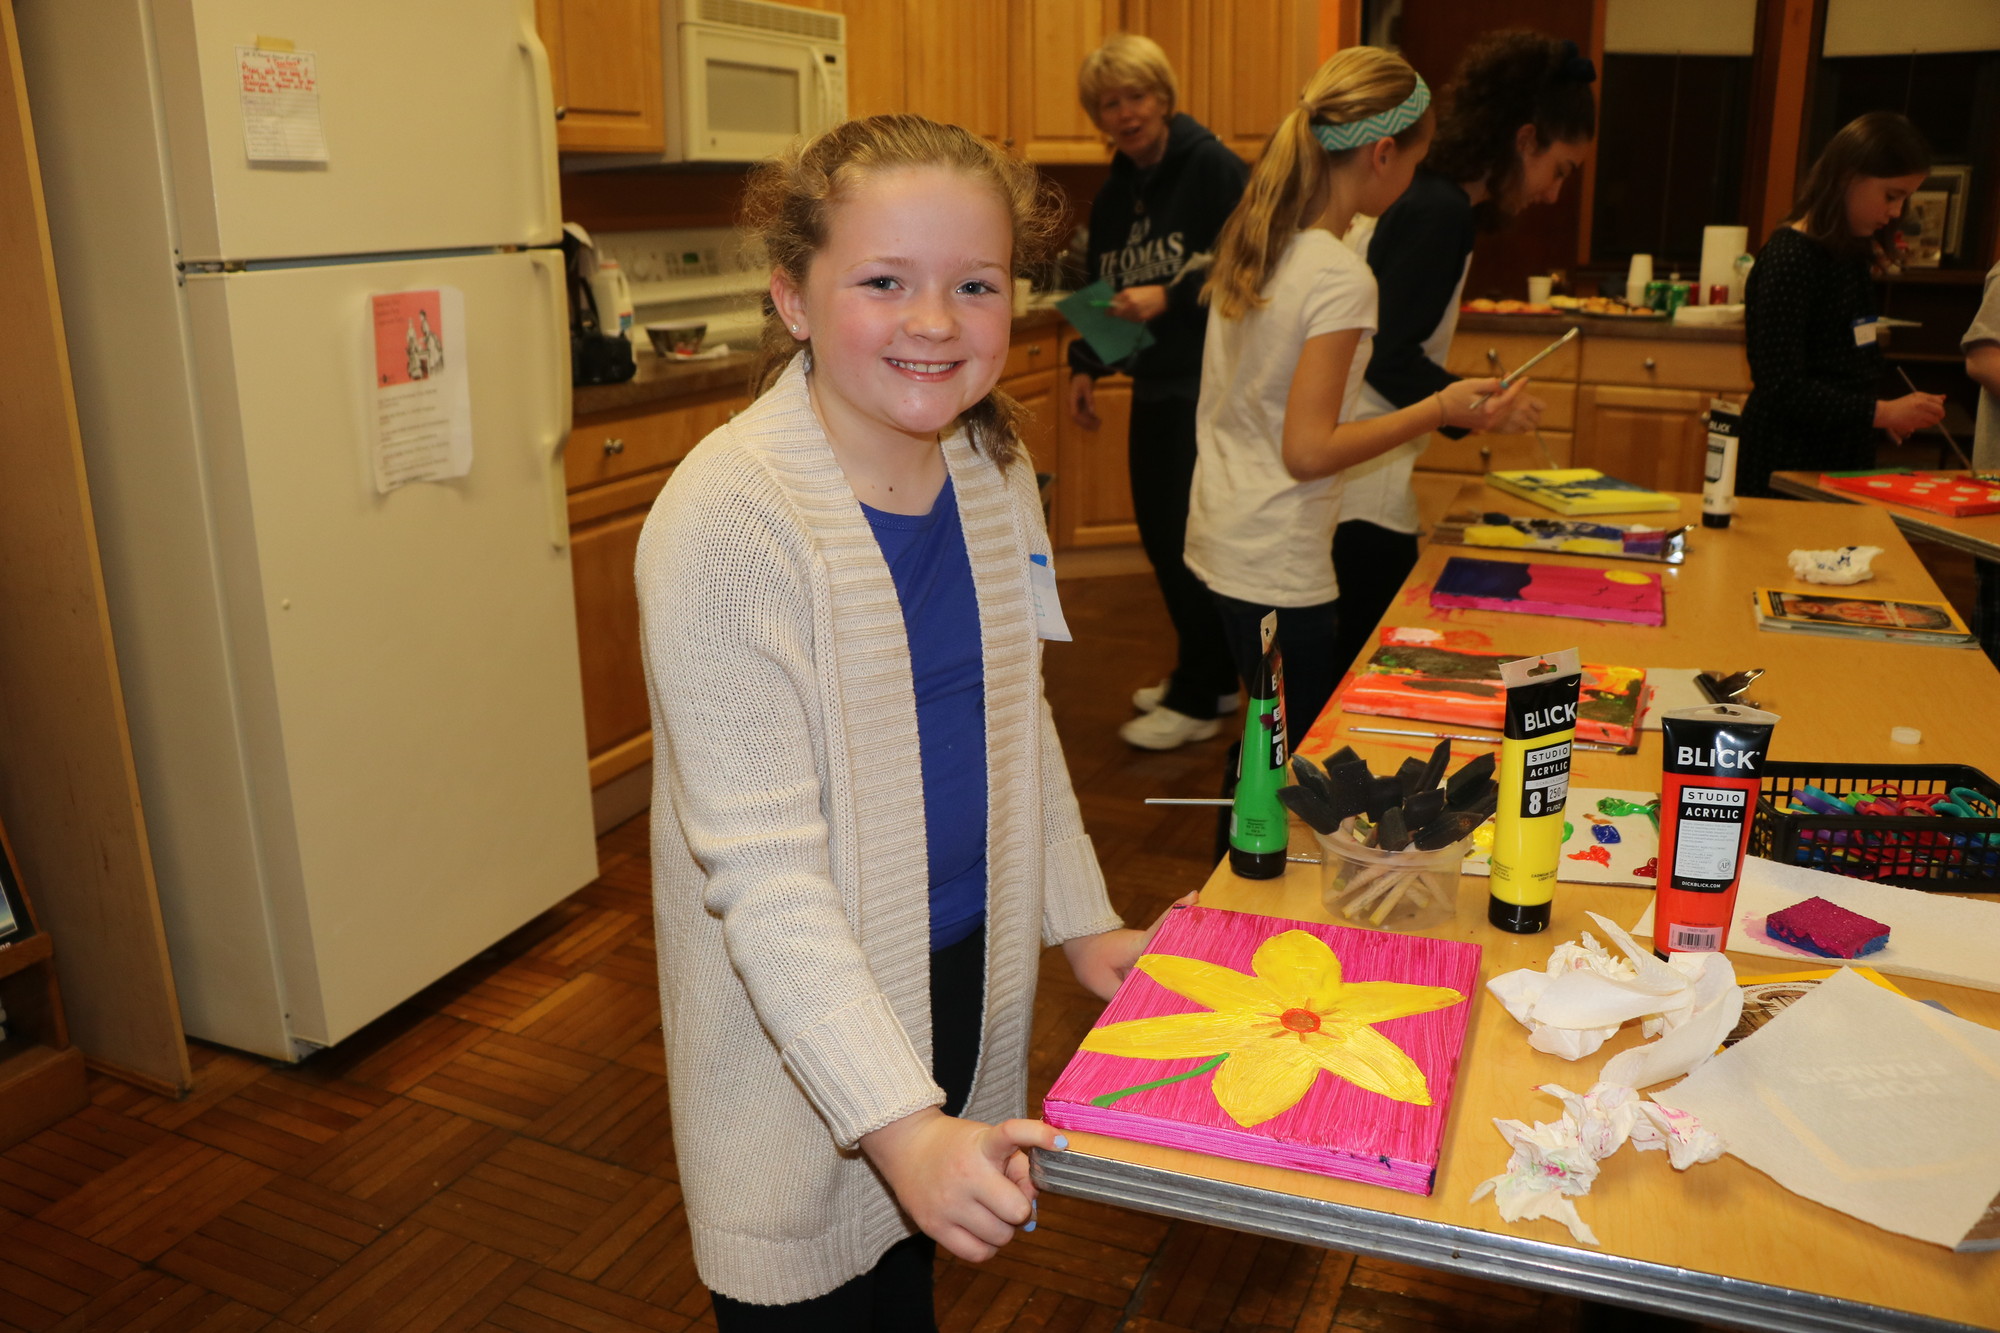 Ella, a fifth-grader at St. Thomas, said Young had inspired her to paint a sunflower.